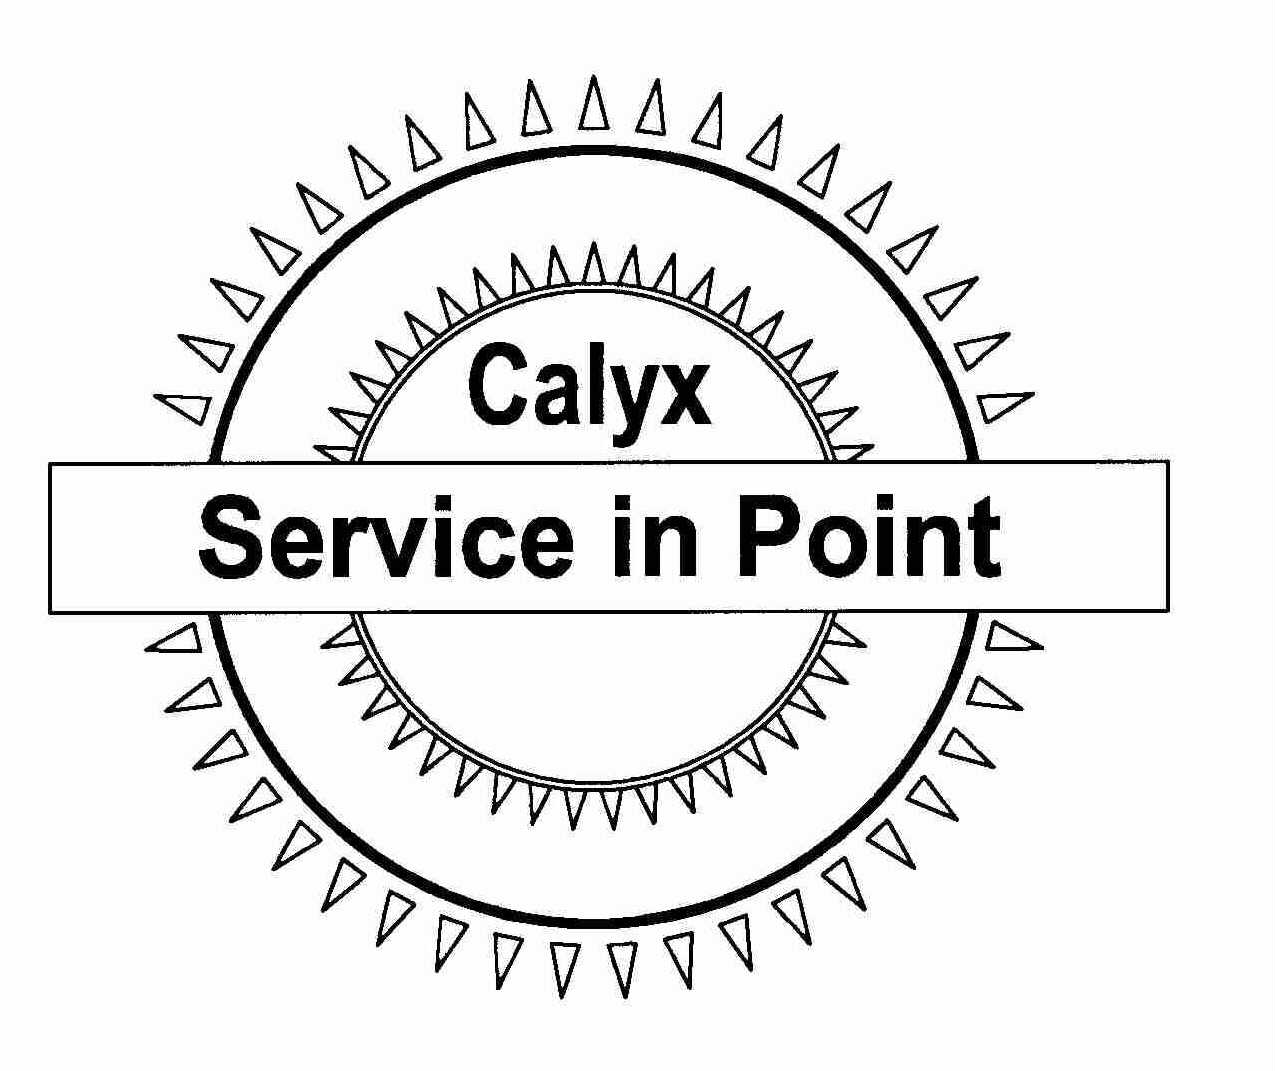  CALYX SERVICE IN POINT